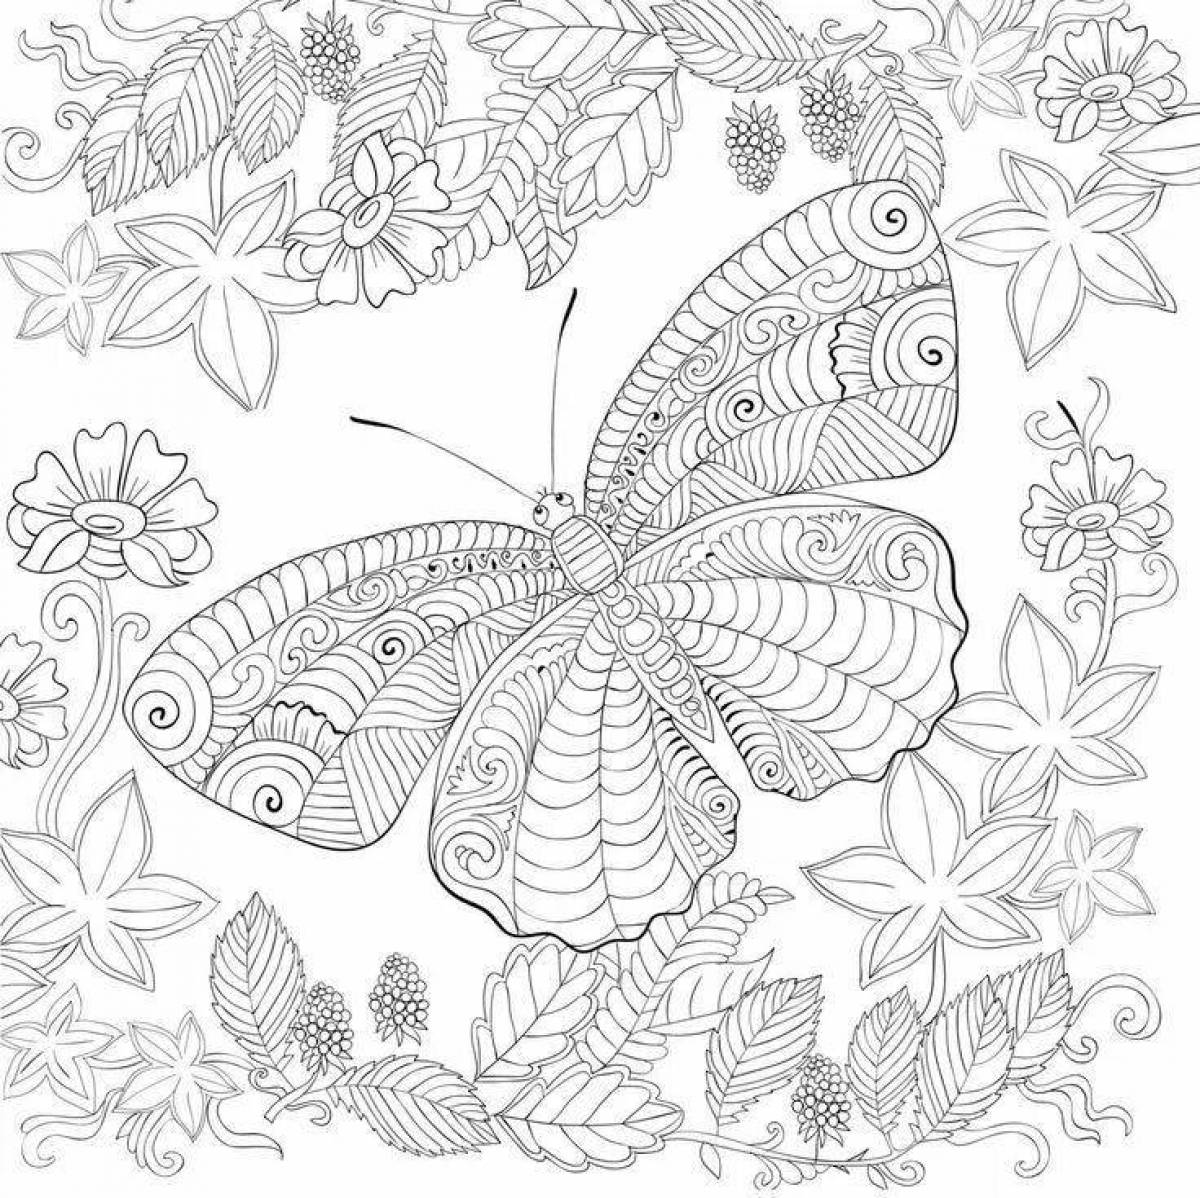 Coloring book colorful-enchantment